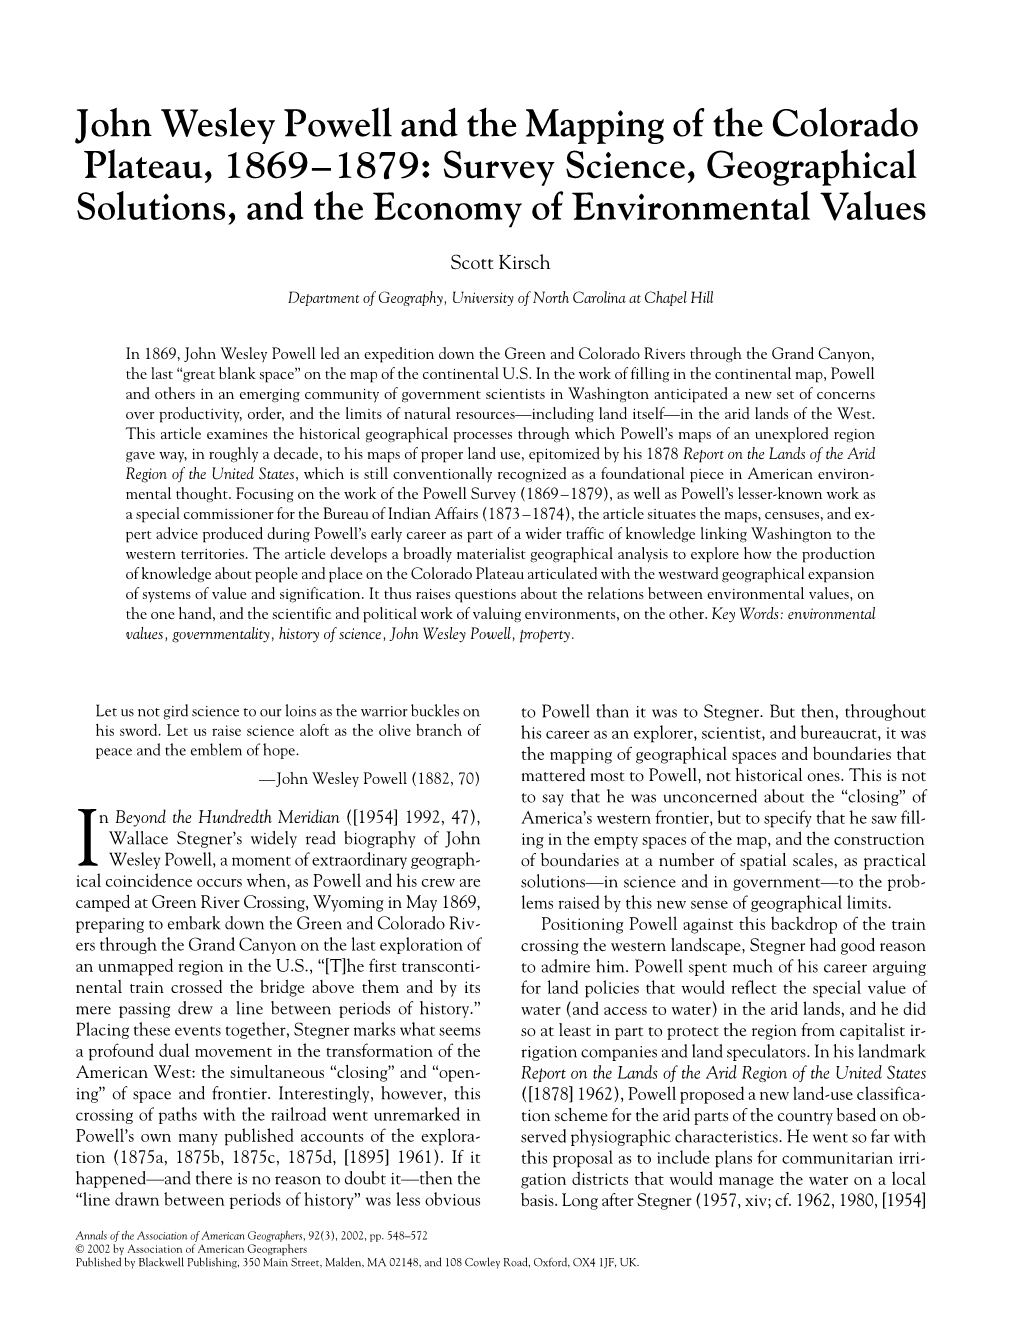 John Wesley Powell and the Mapping of the Colorado Plateau, 1869–1879: Survey Science, Geographical Solutions, and the Economy of Environmental Values